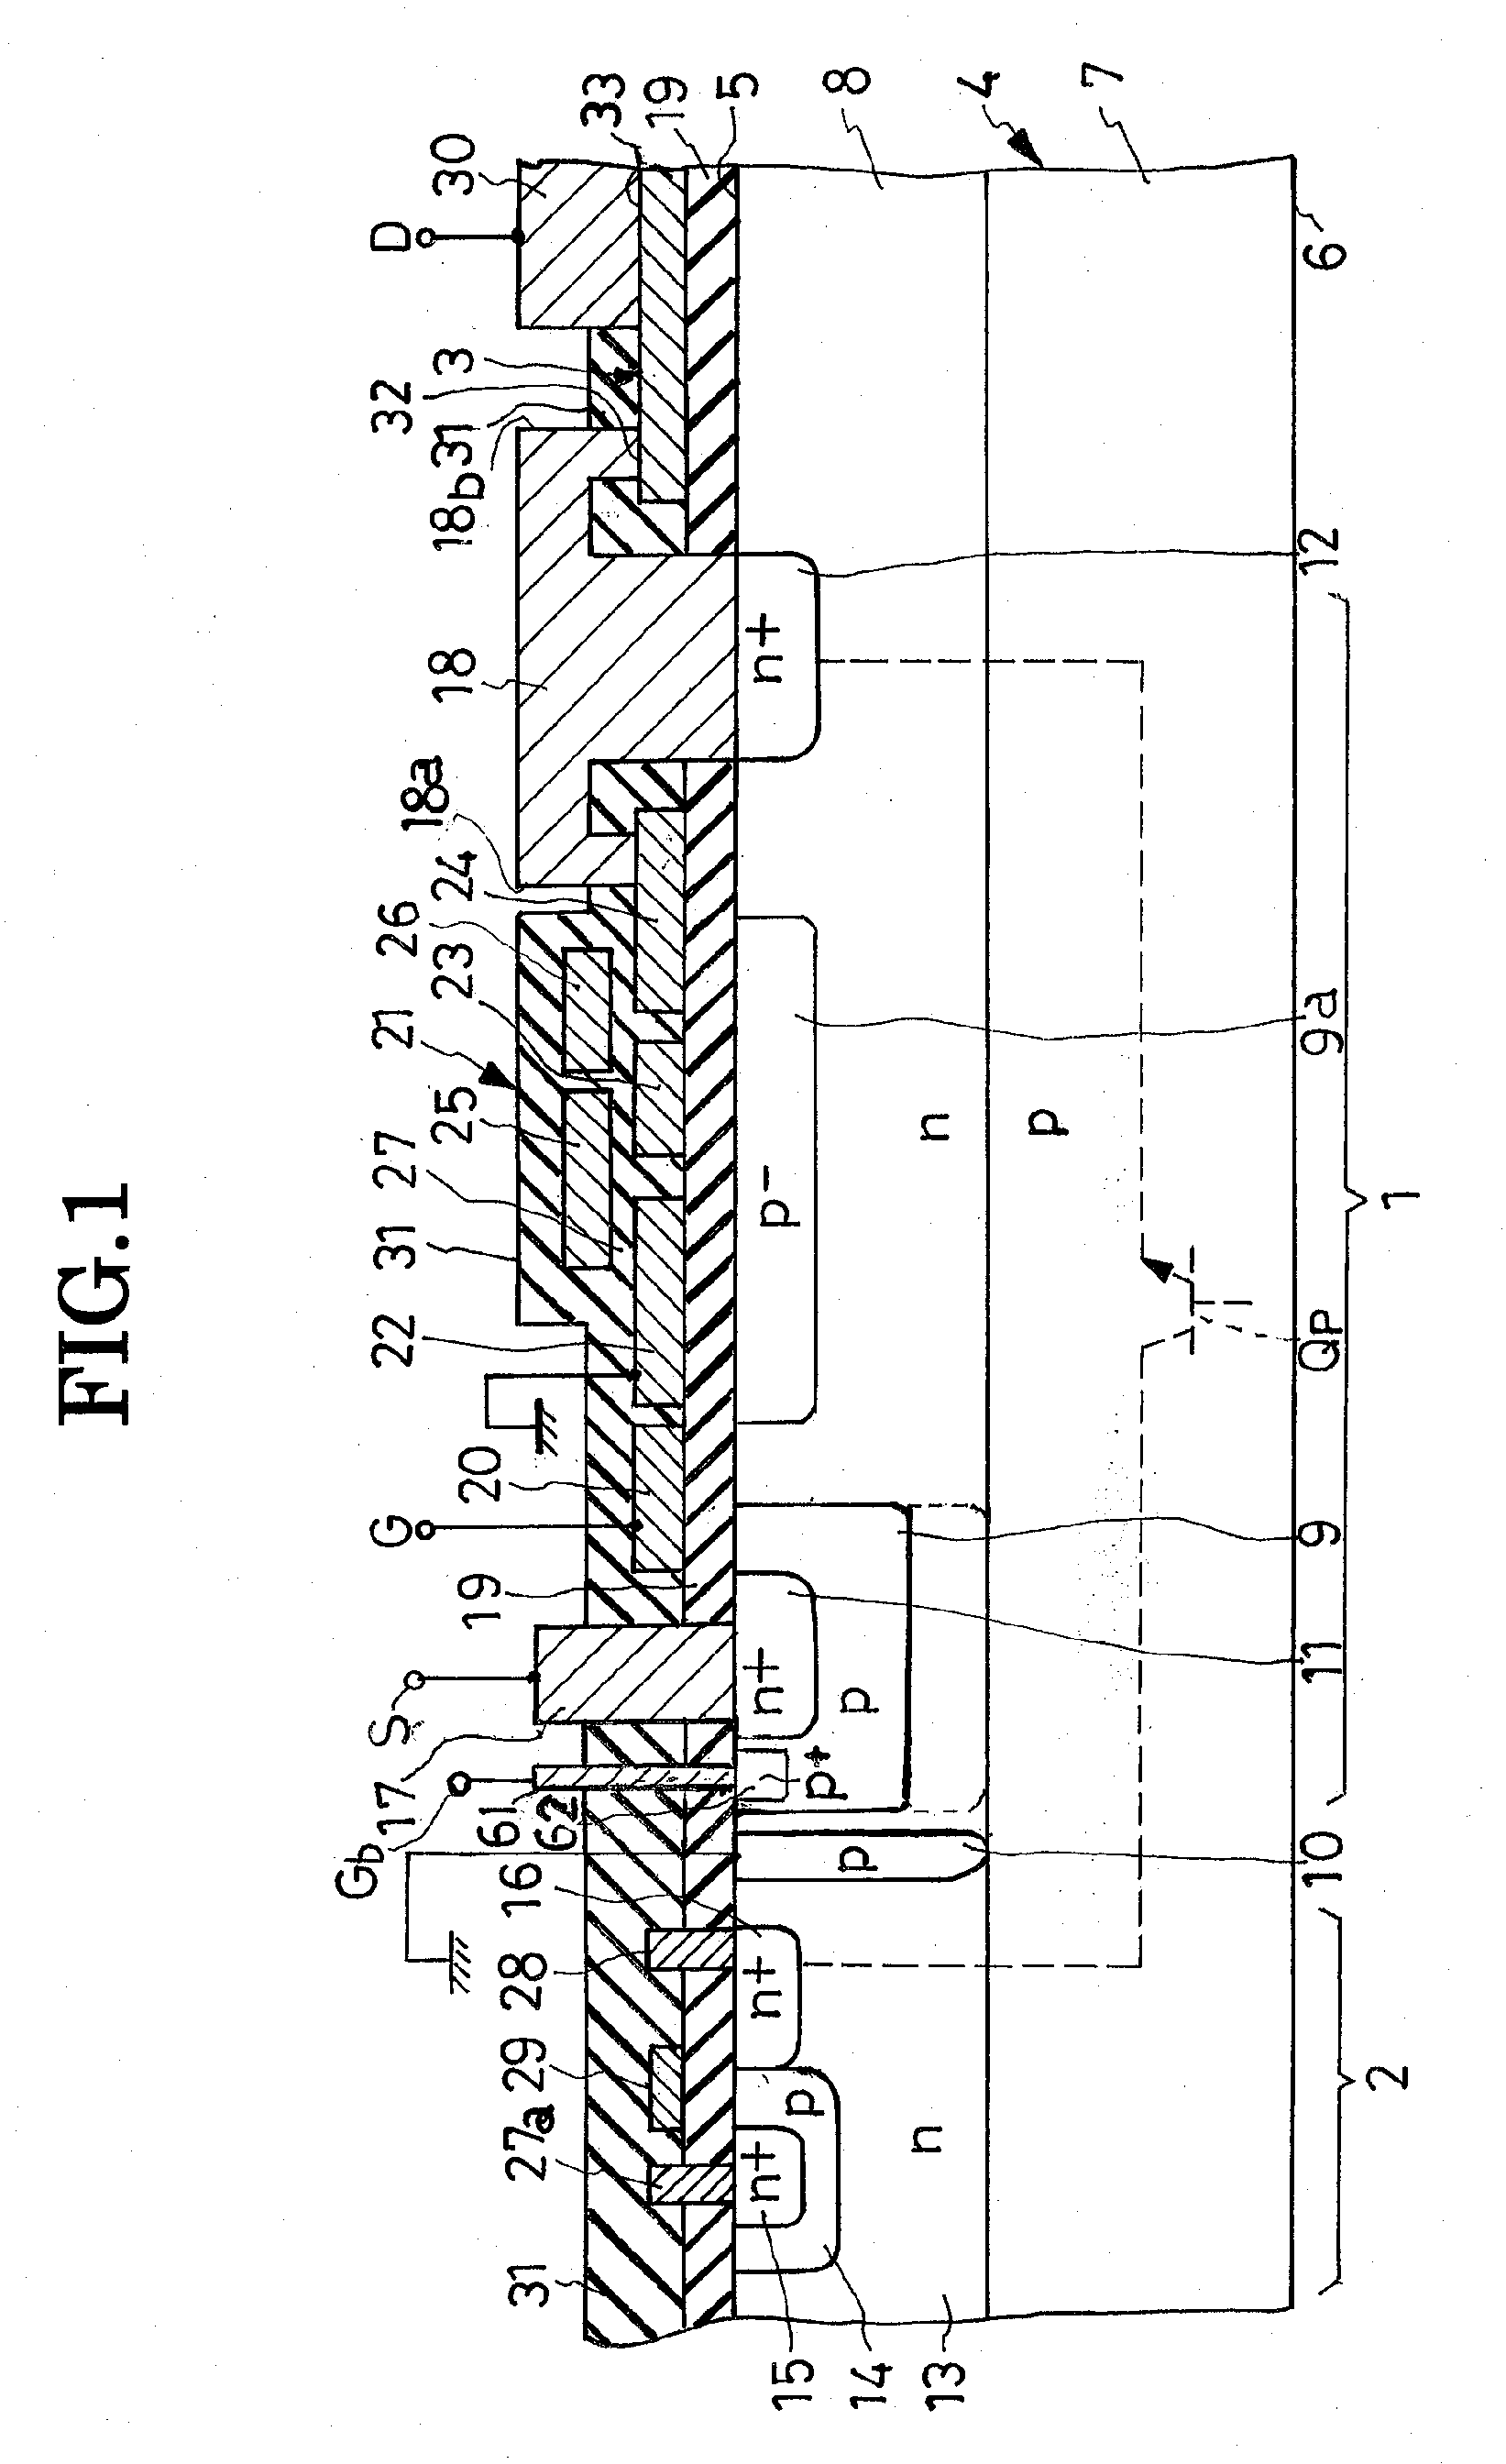 Integrated Circuit Having a Multipurpose Resistor for Suppression of a Parasitic Transistor or Other Purposes